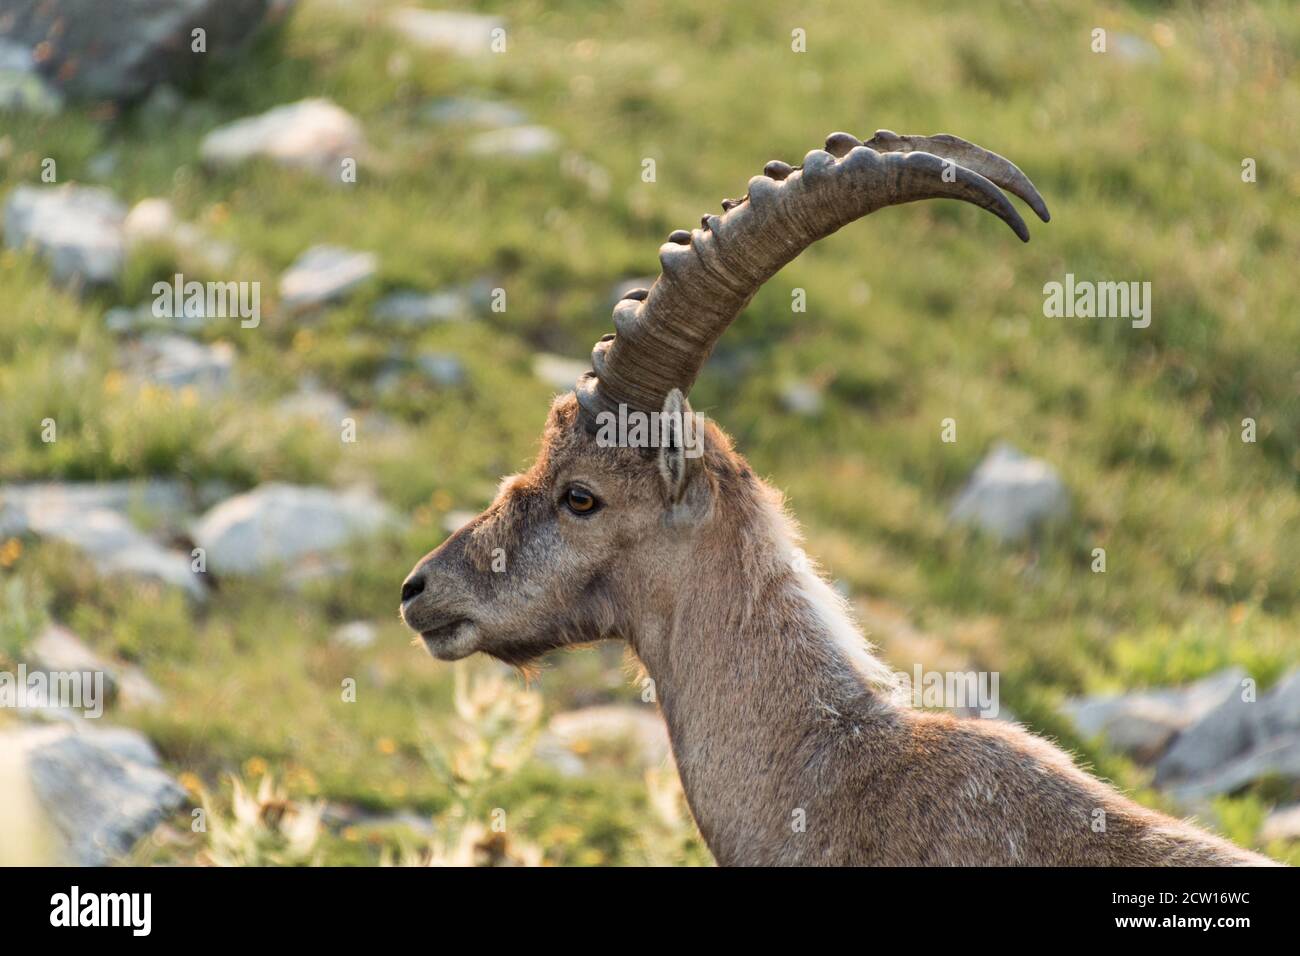 Ibex in profile in the foreground. Adult male ibex standing in the middle of a rocky meadow in the mountains. Stock Photo